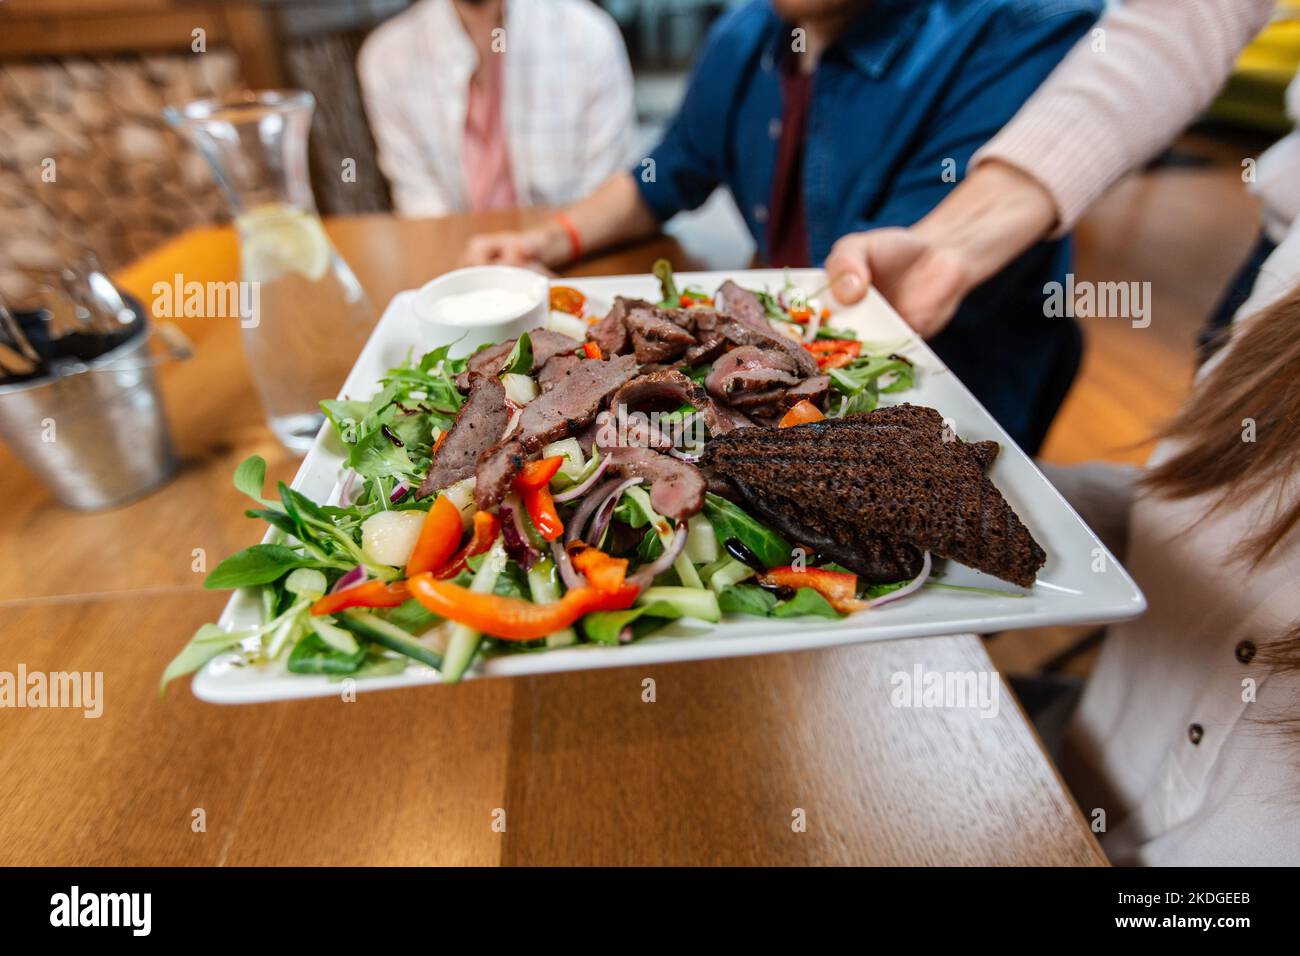 close up of hand with food on plate at restaurant Stock Photo